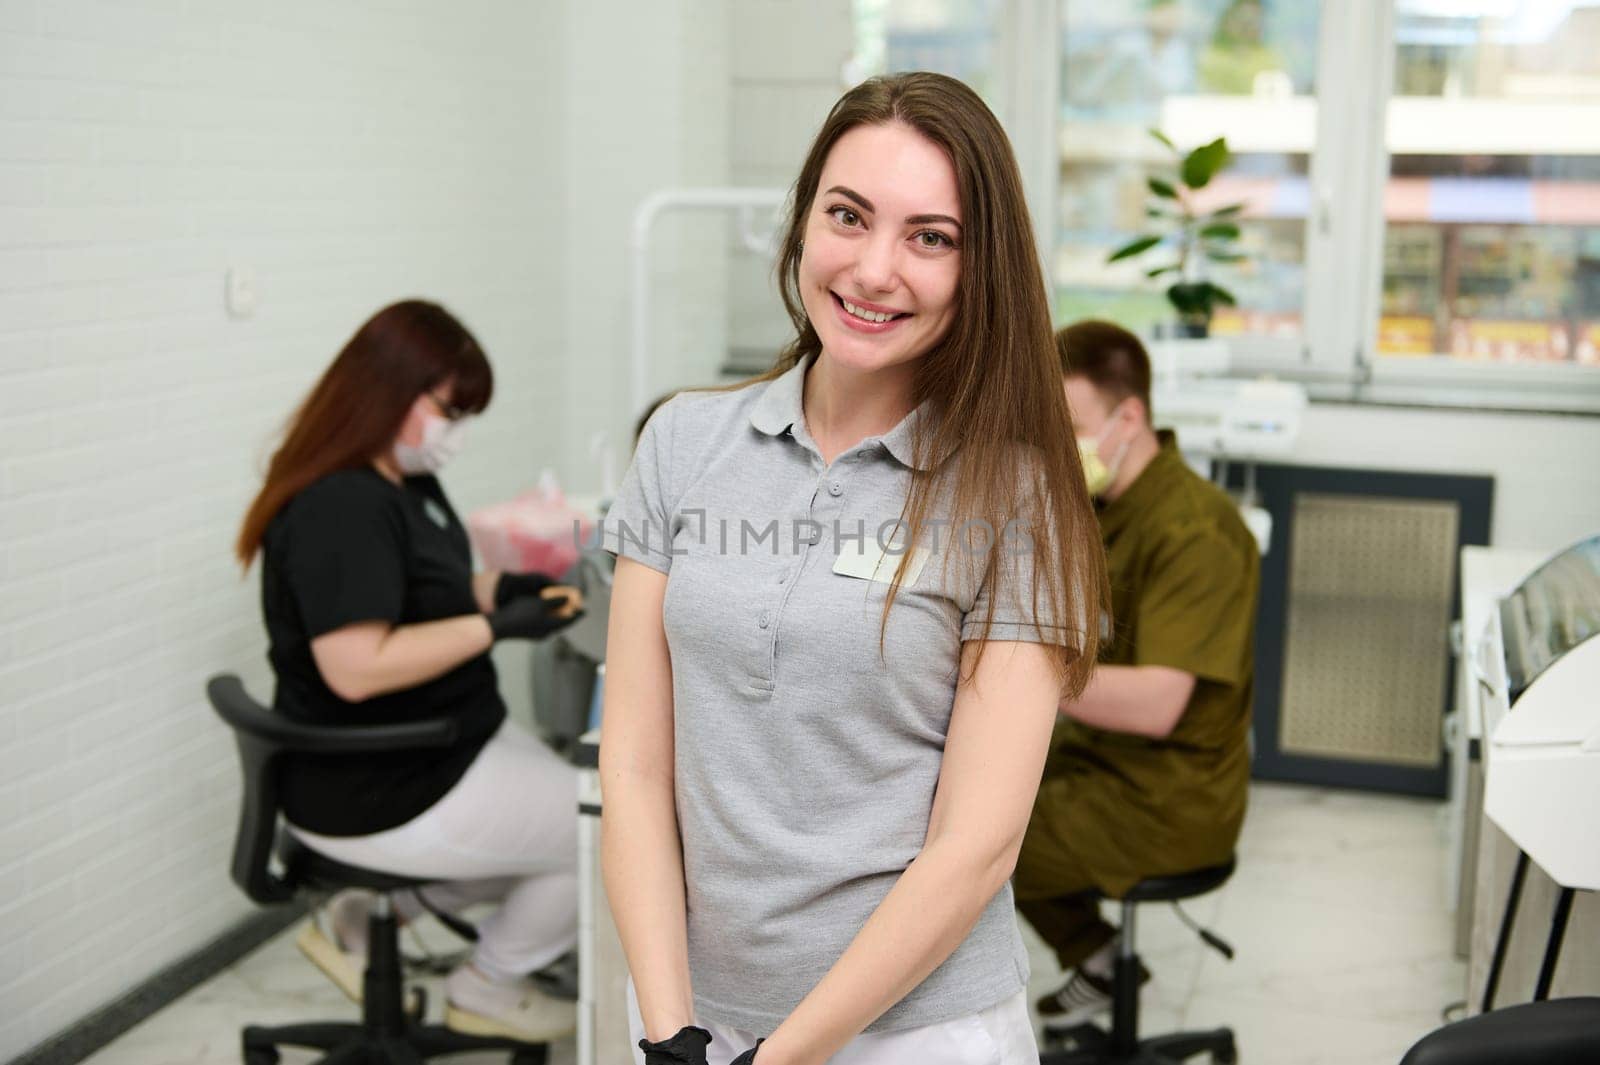 Portrait of Caucasian young female dentist doctor, dental hygienist, maxillofacial surgeon, orthodontist smiling looking at camera, standing in the dental examination room of a modern dentistry clinic